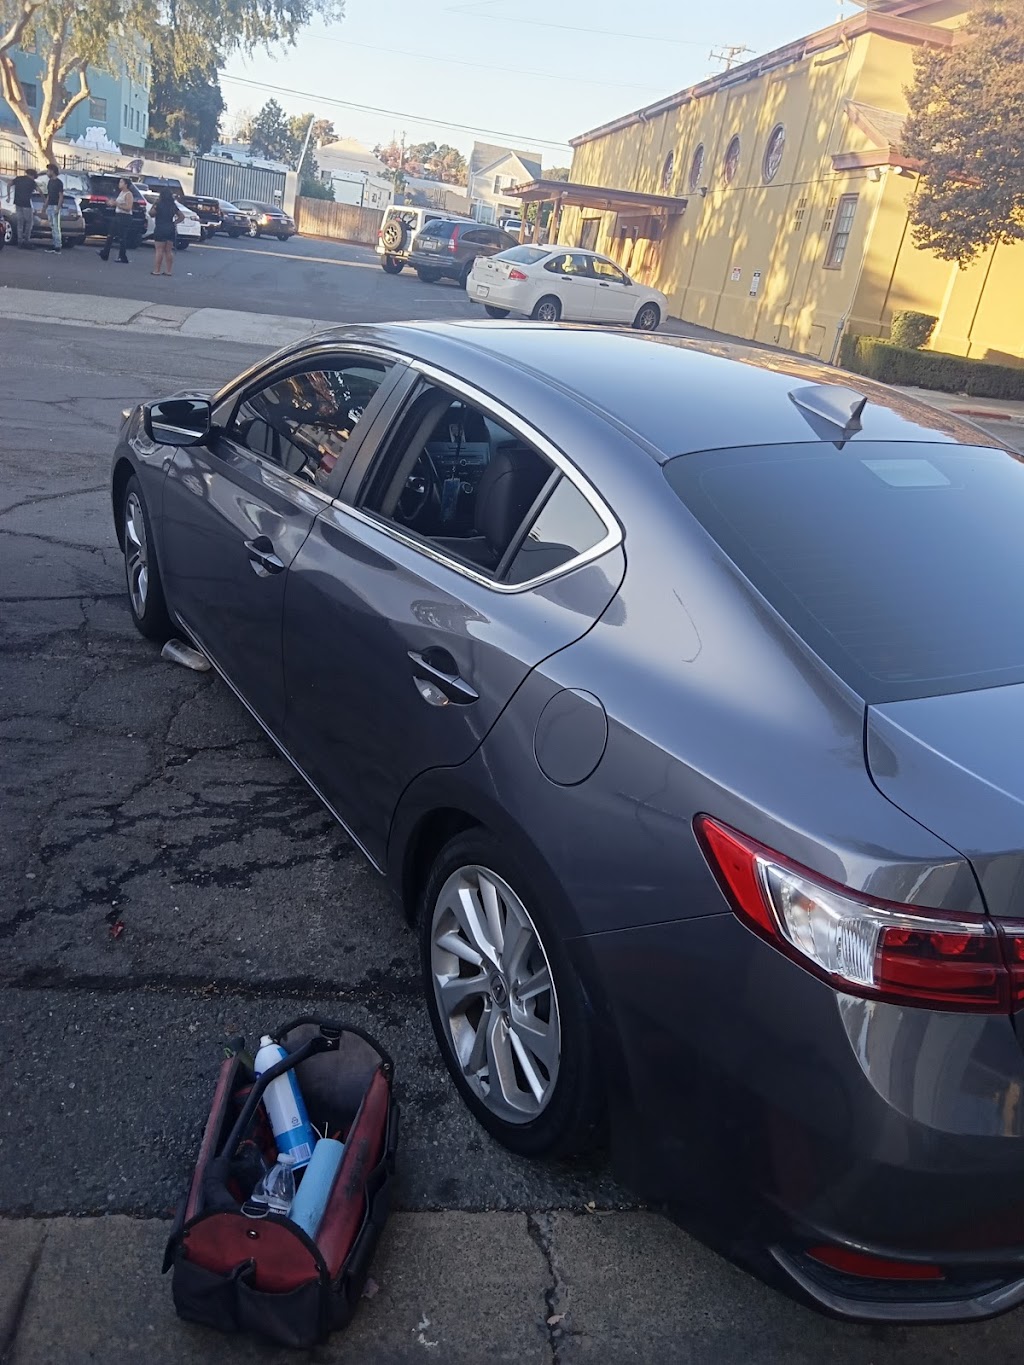 Best & Fast Auto Glass Vallejo | 174 Lain Dr, Vallejo, CA 94591 | Phone: (510) 575-7066